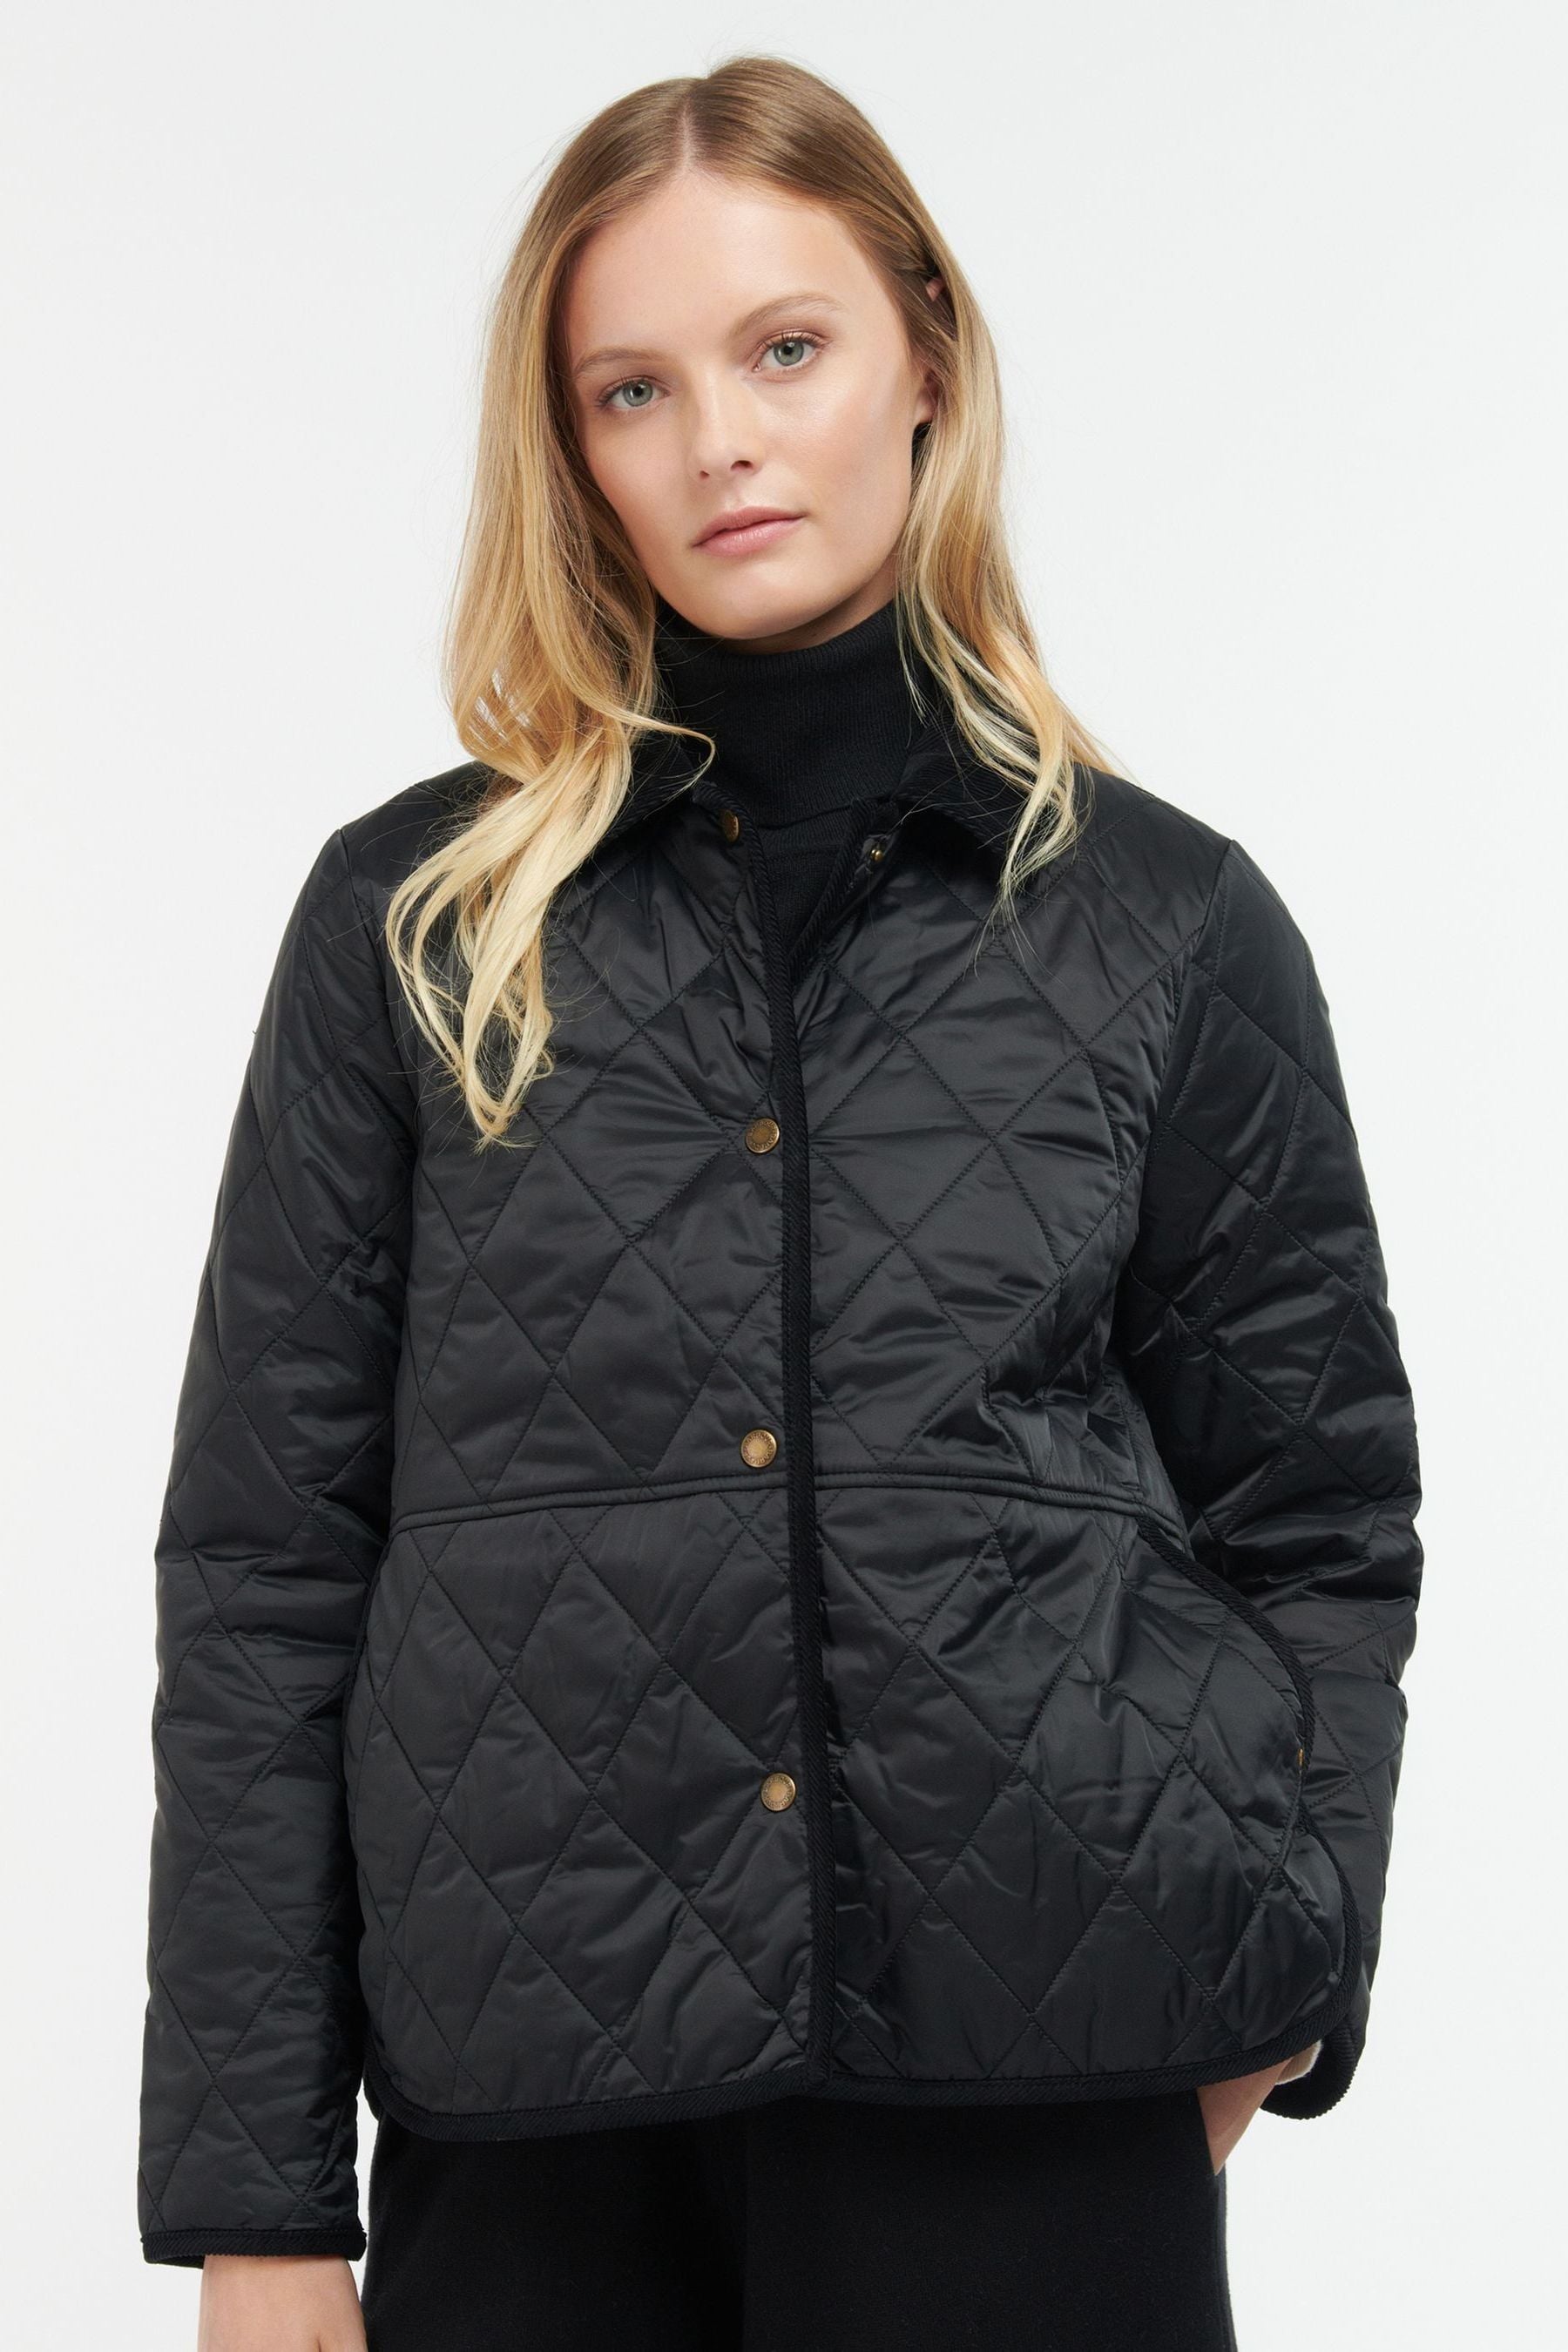 Buy Barbour® Black Clydebank Quilted Jacket from the Next UK online shop